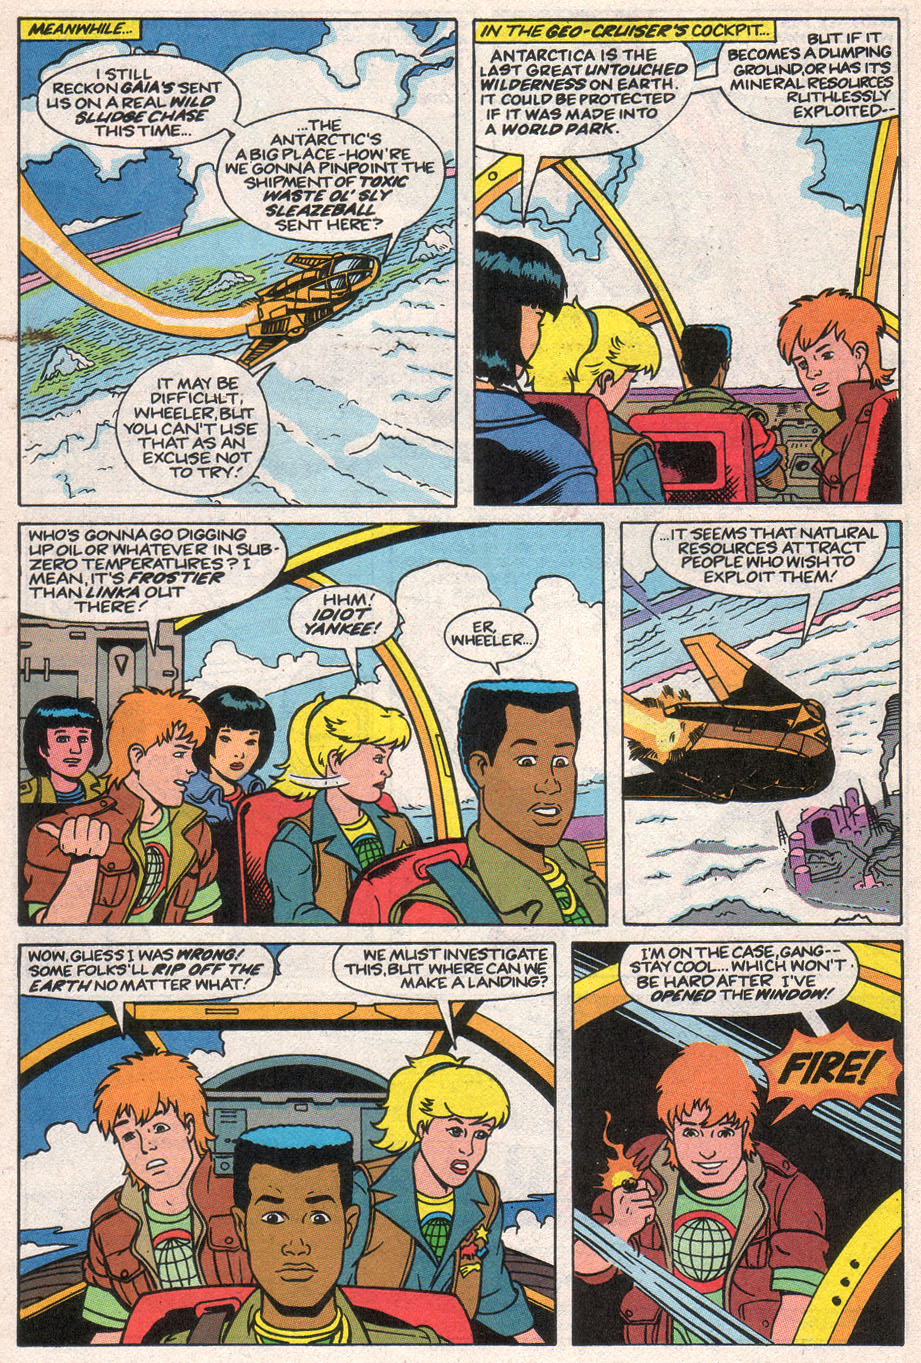 Captain Planet and the Planeteers 10 Page 17